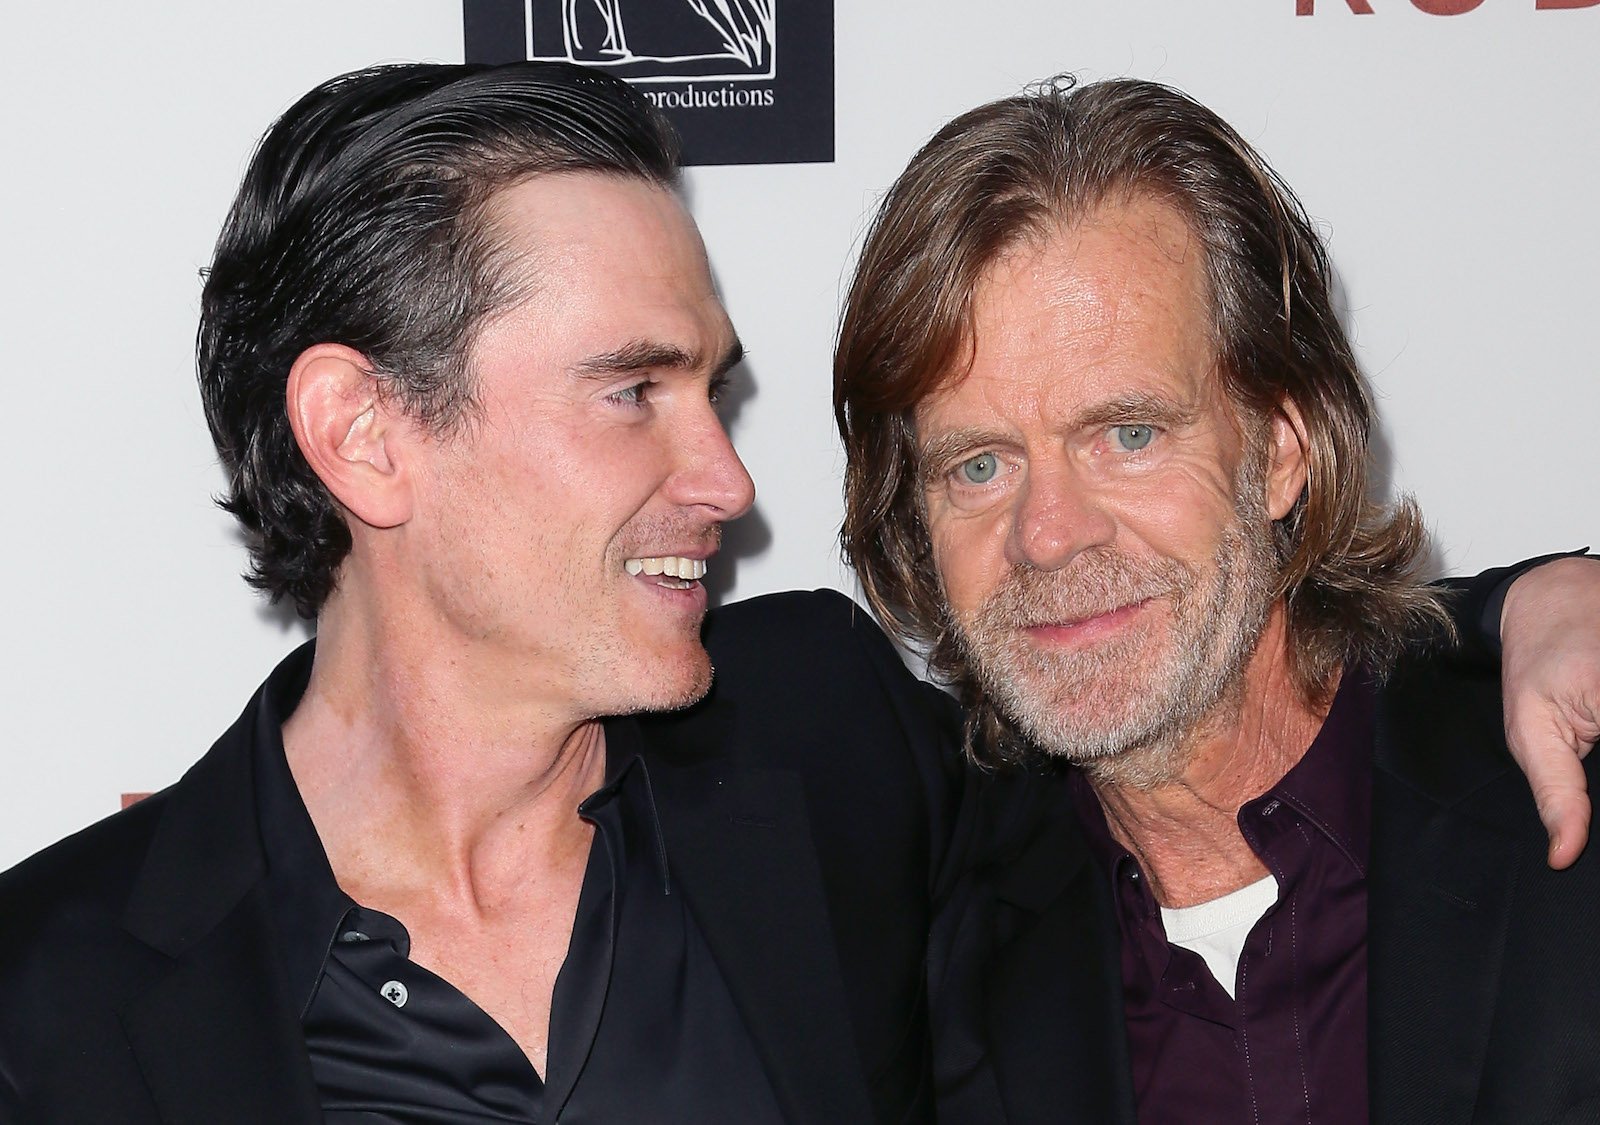 Billy Crudup from 'The Morning Show' said William H. Macy told him to fake a big scene